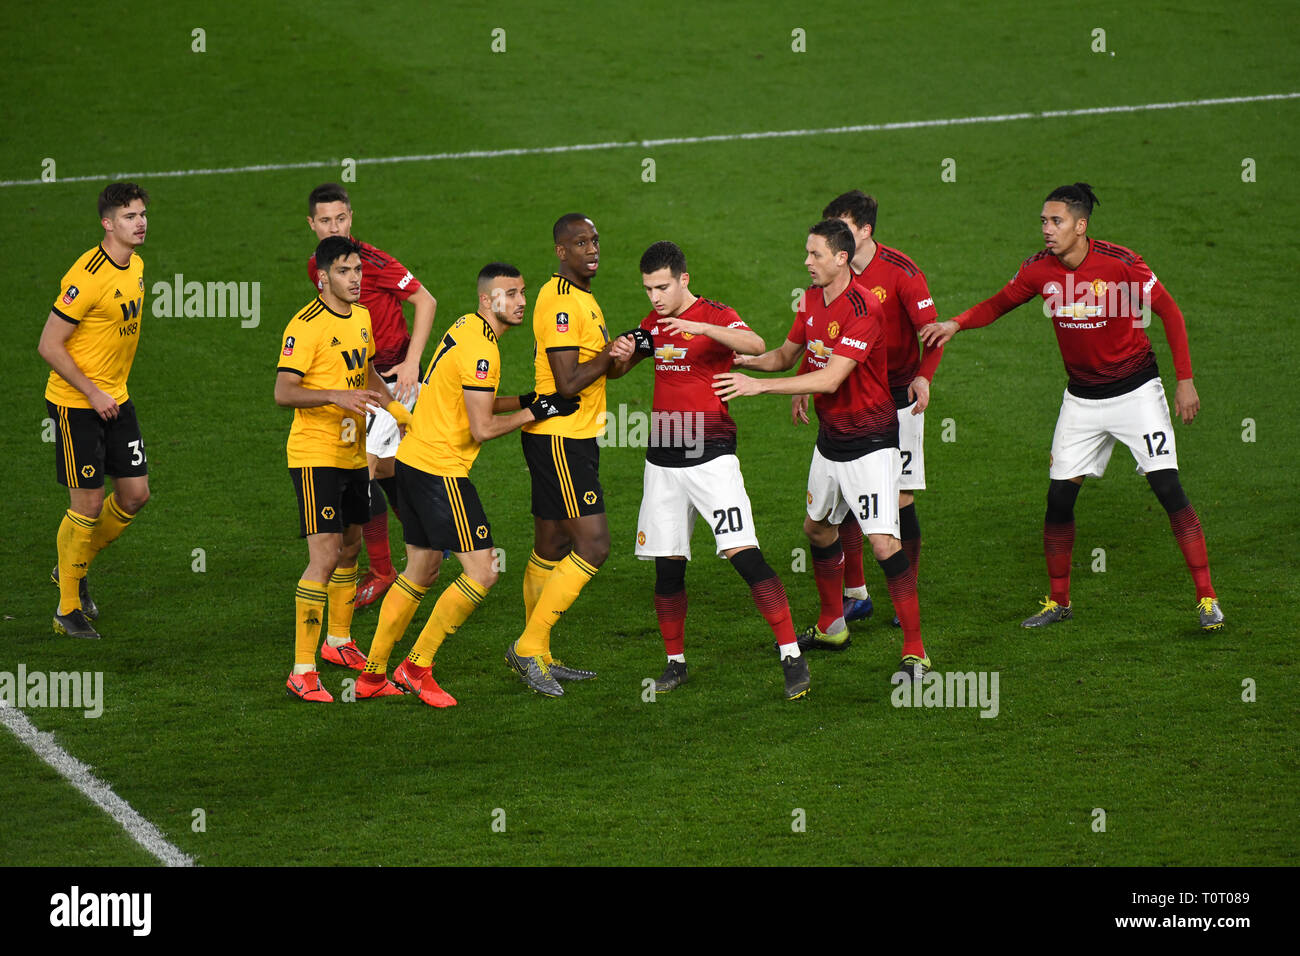 Football action Wolverhampton Wanderers v Manchester United 2019 Stock Photo